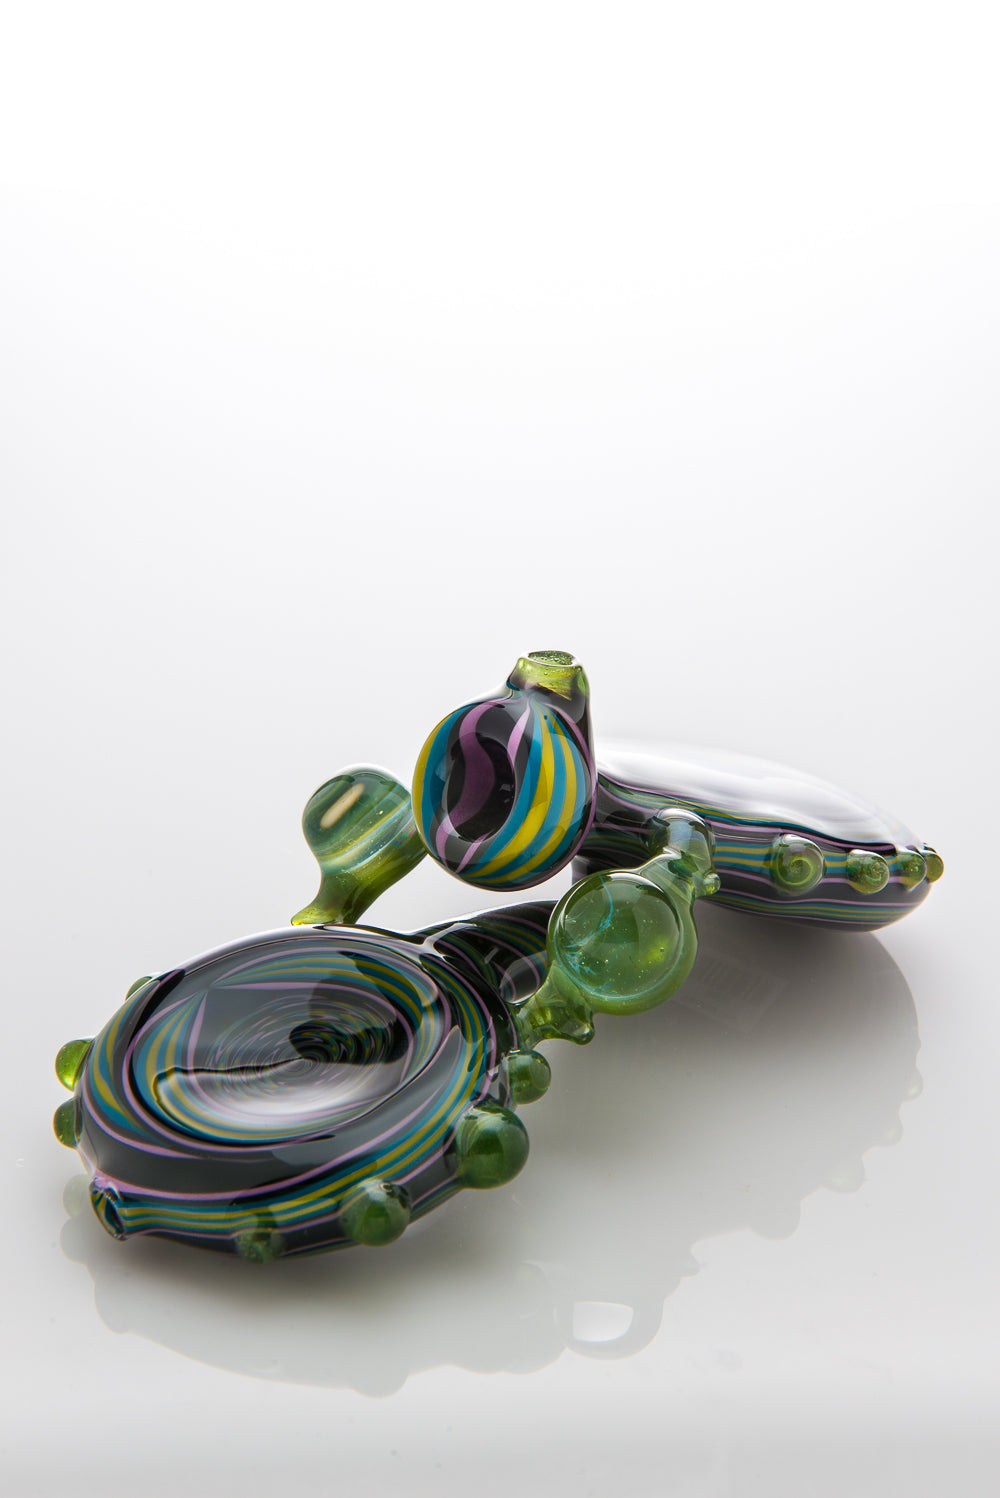 Double Reversals Pod with Marbles by WJC